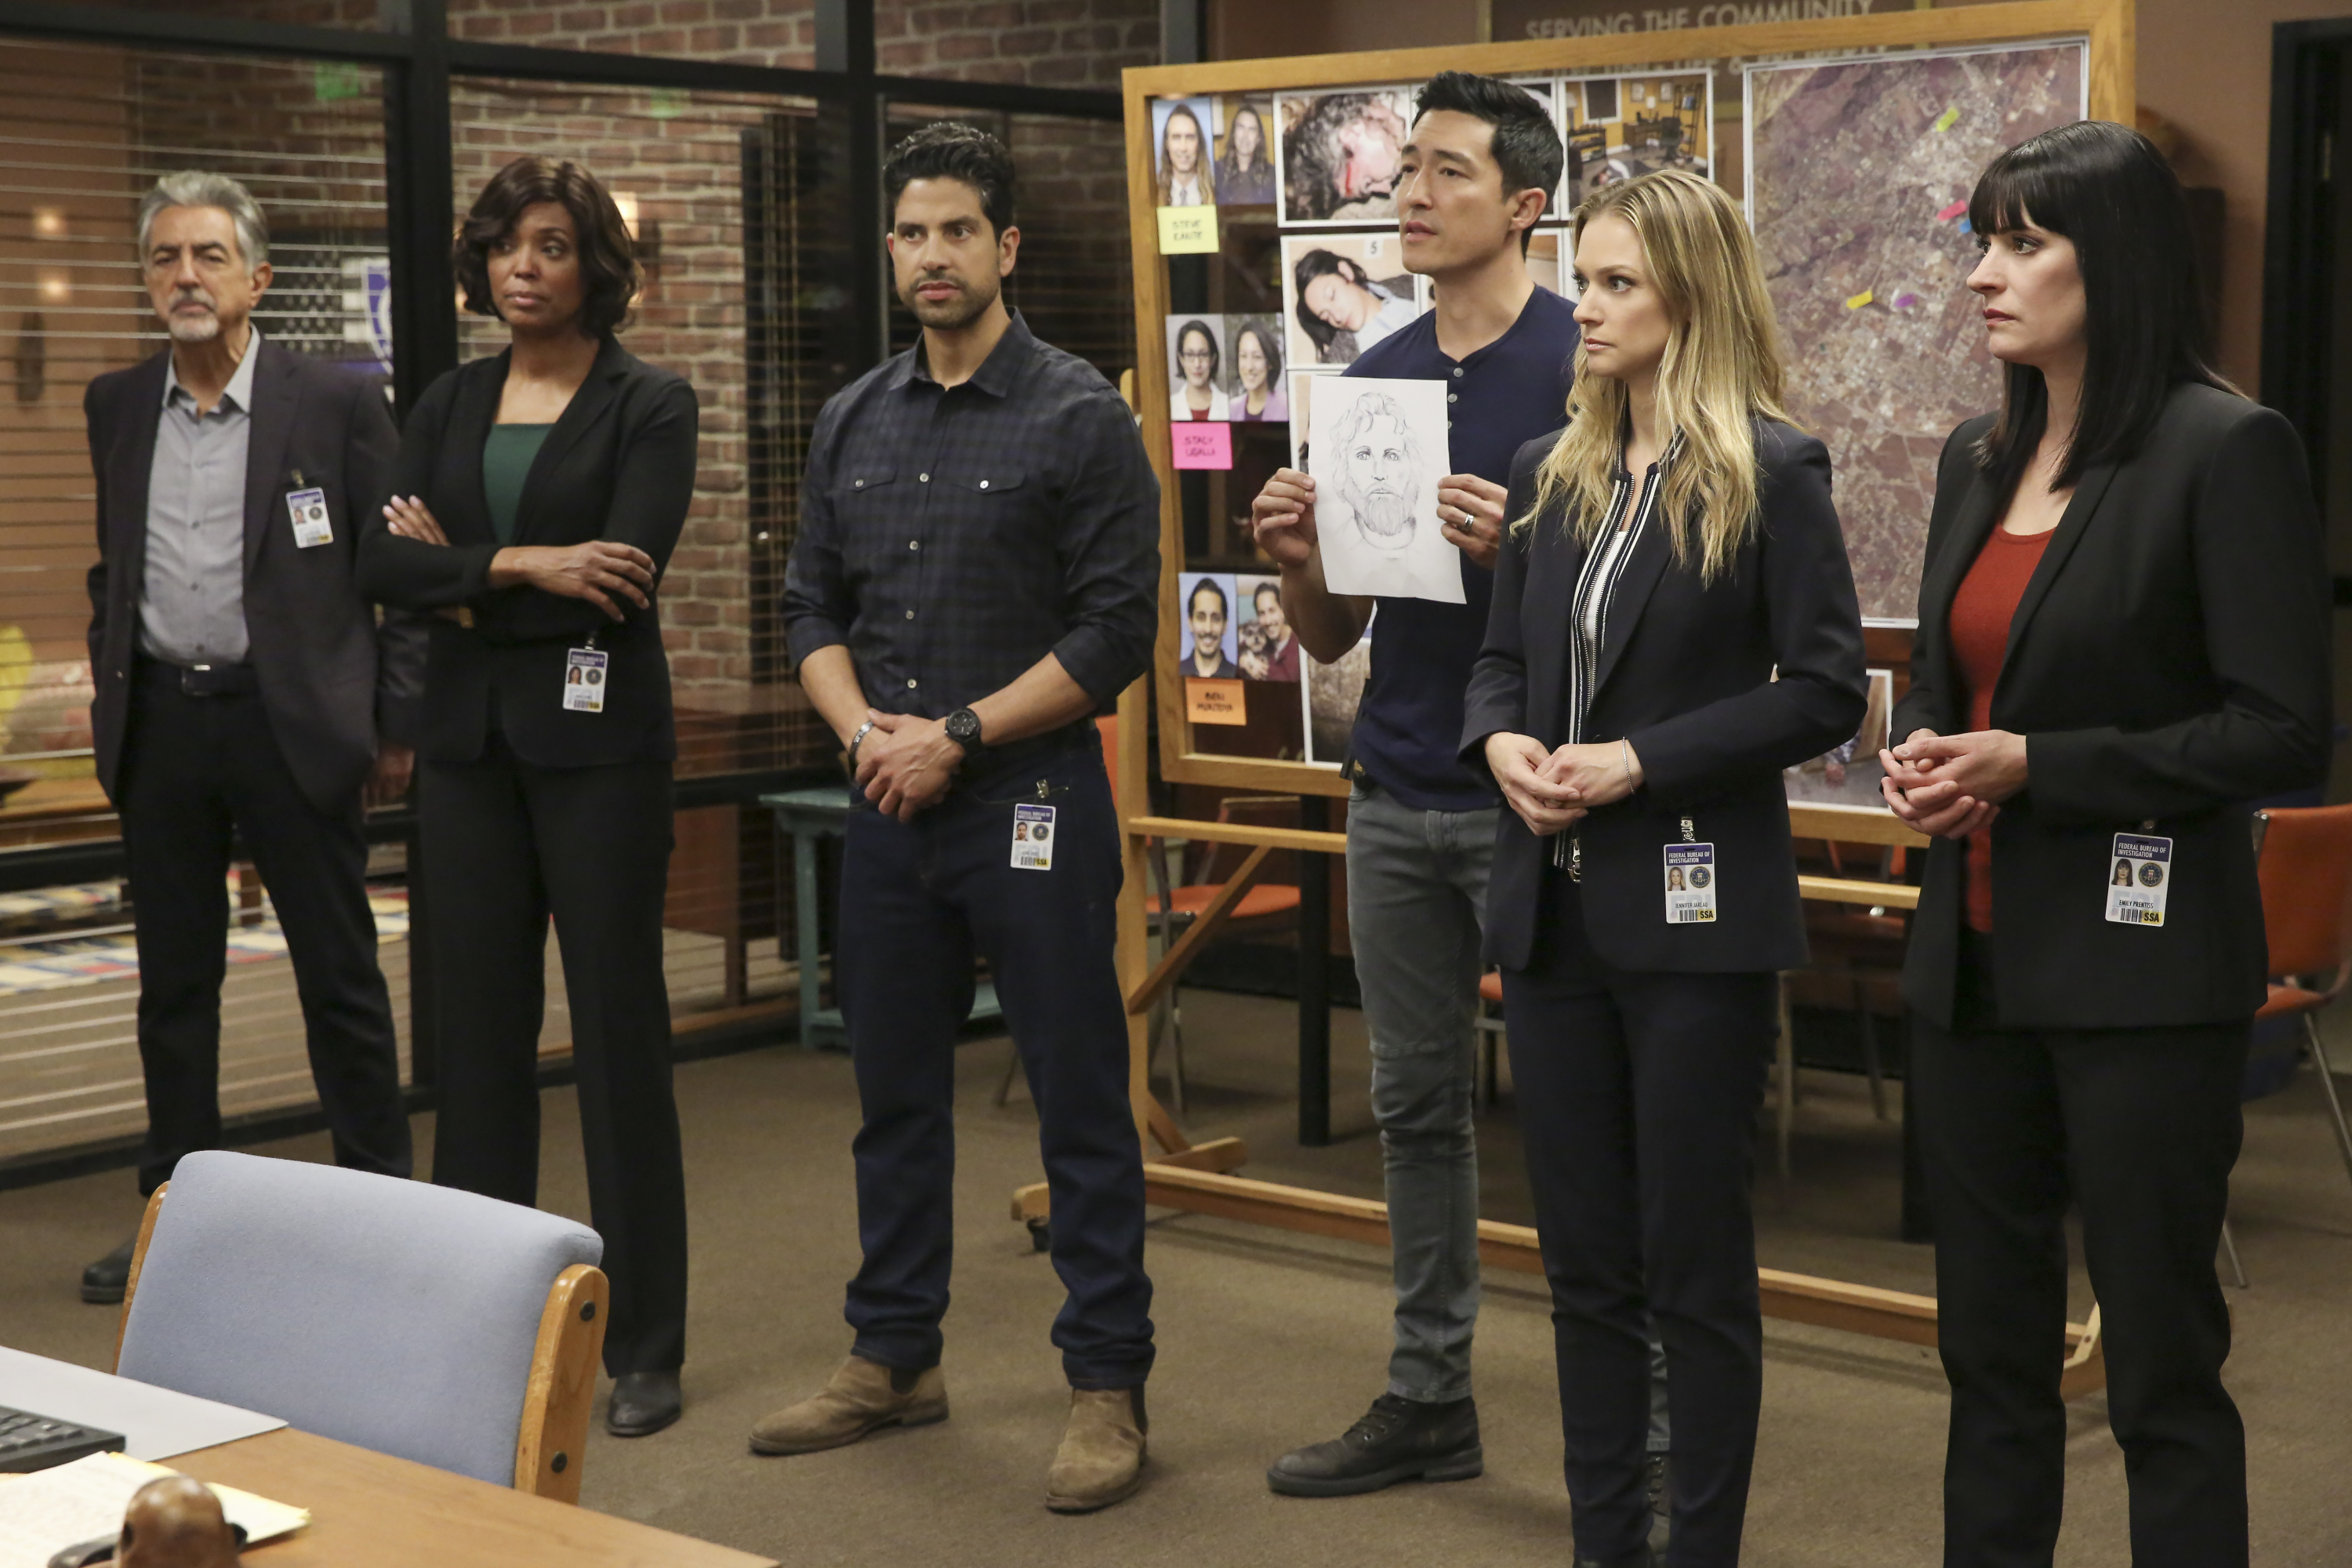 The Criminal Minds cast stands next to each other